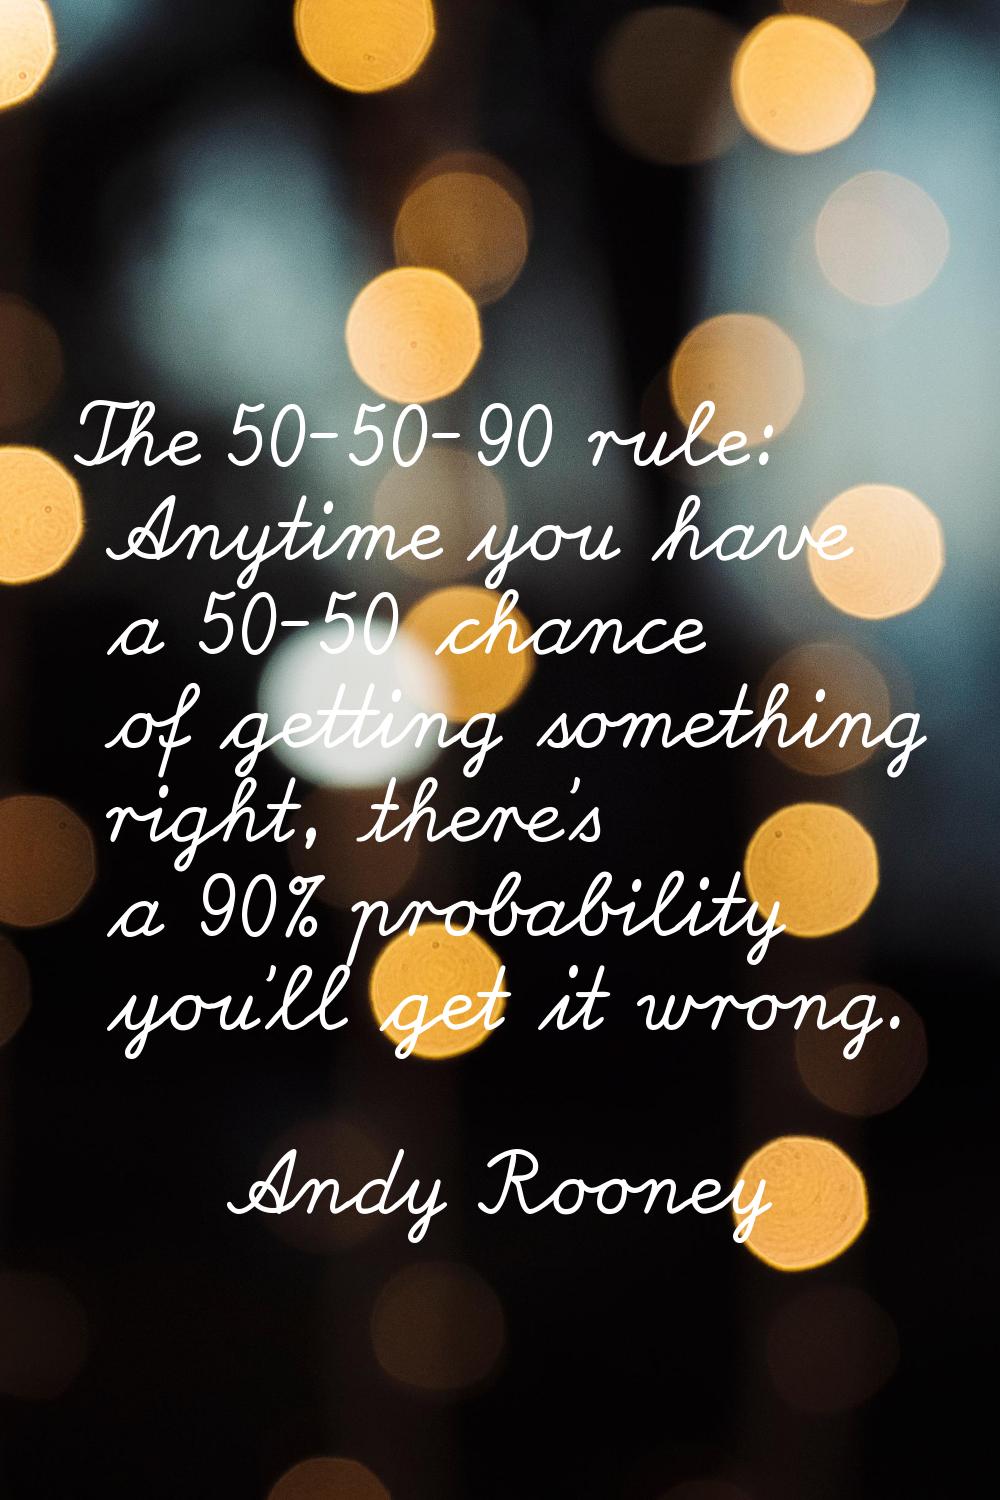 The 50-50-90 rule: Anytime you have a 50-50 chance of getting something right, there's a 90% probab